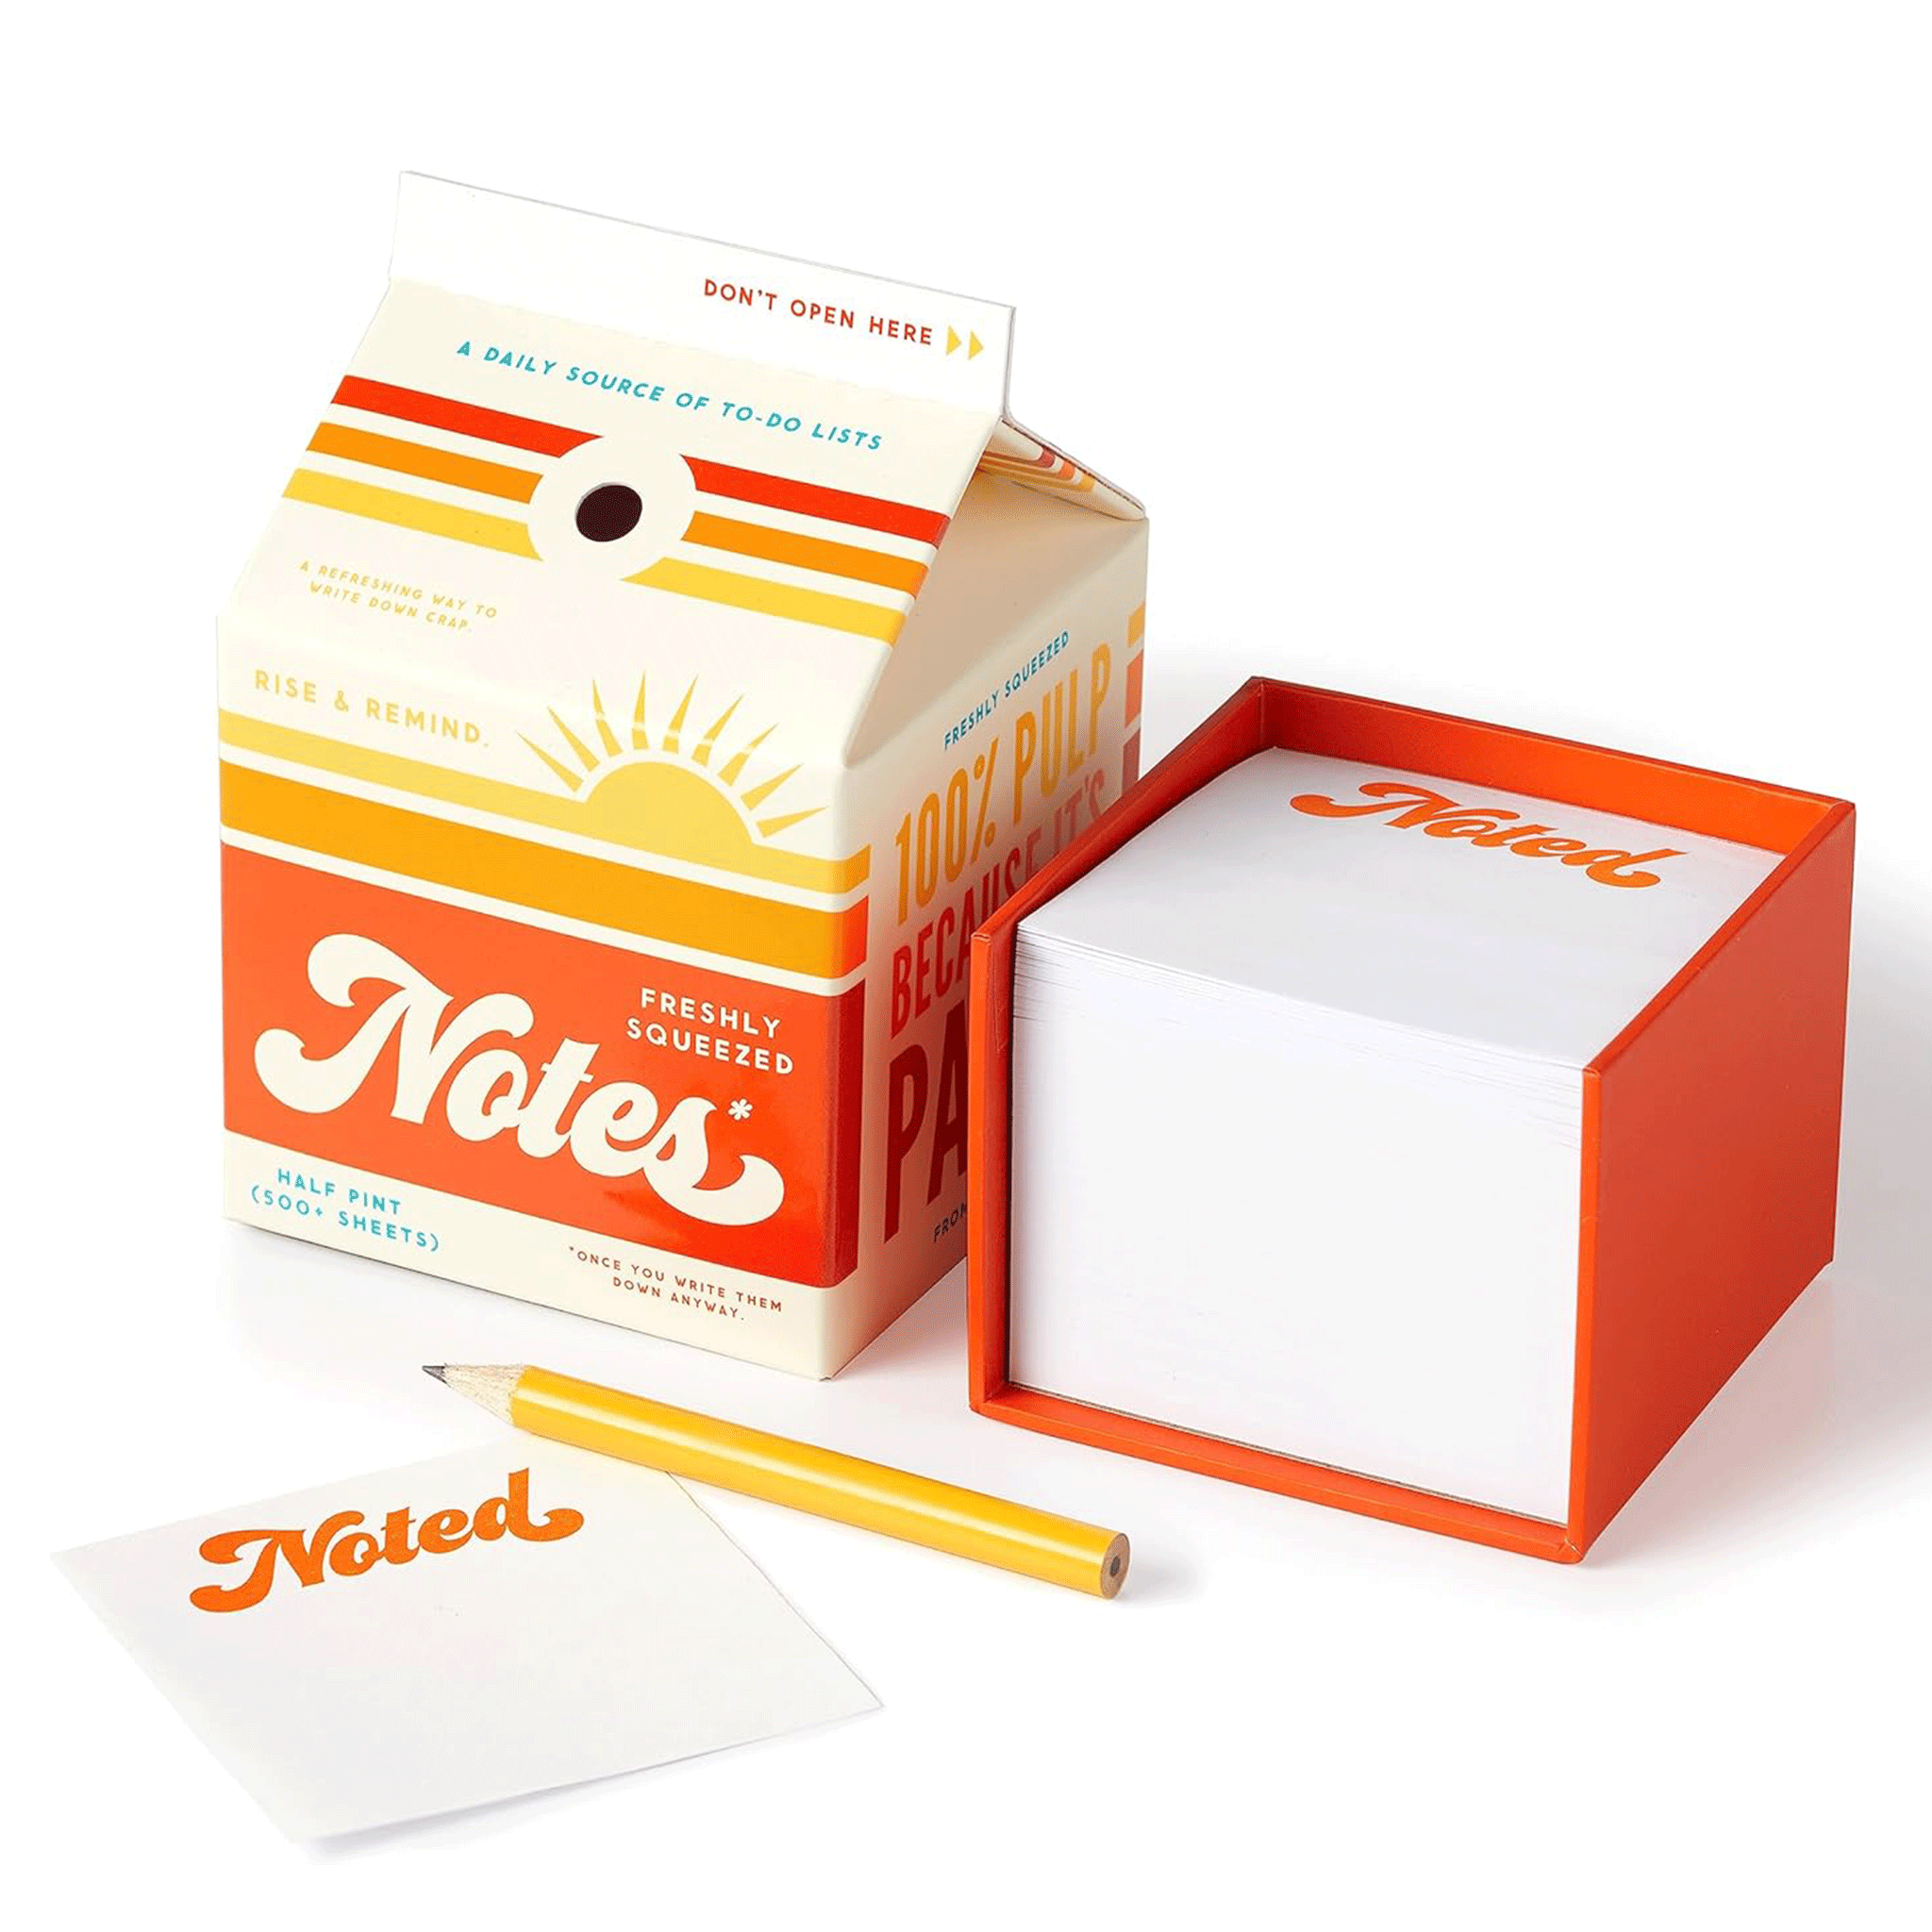 On a white background is a juice carton shaped note pad box with a pencil that is stored in the "straw hole". 